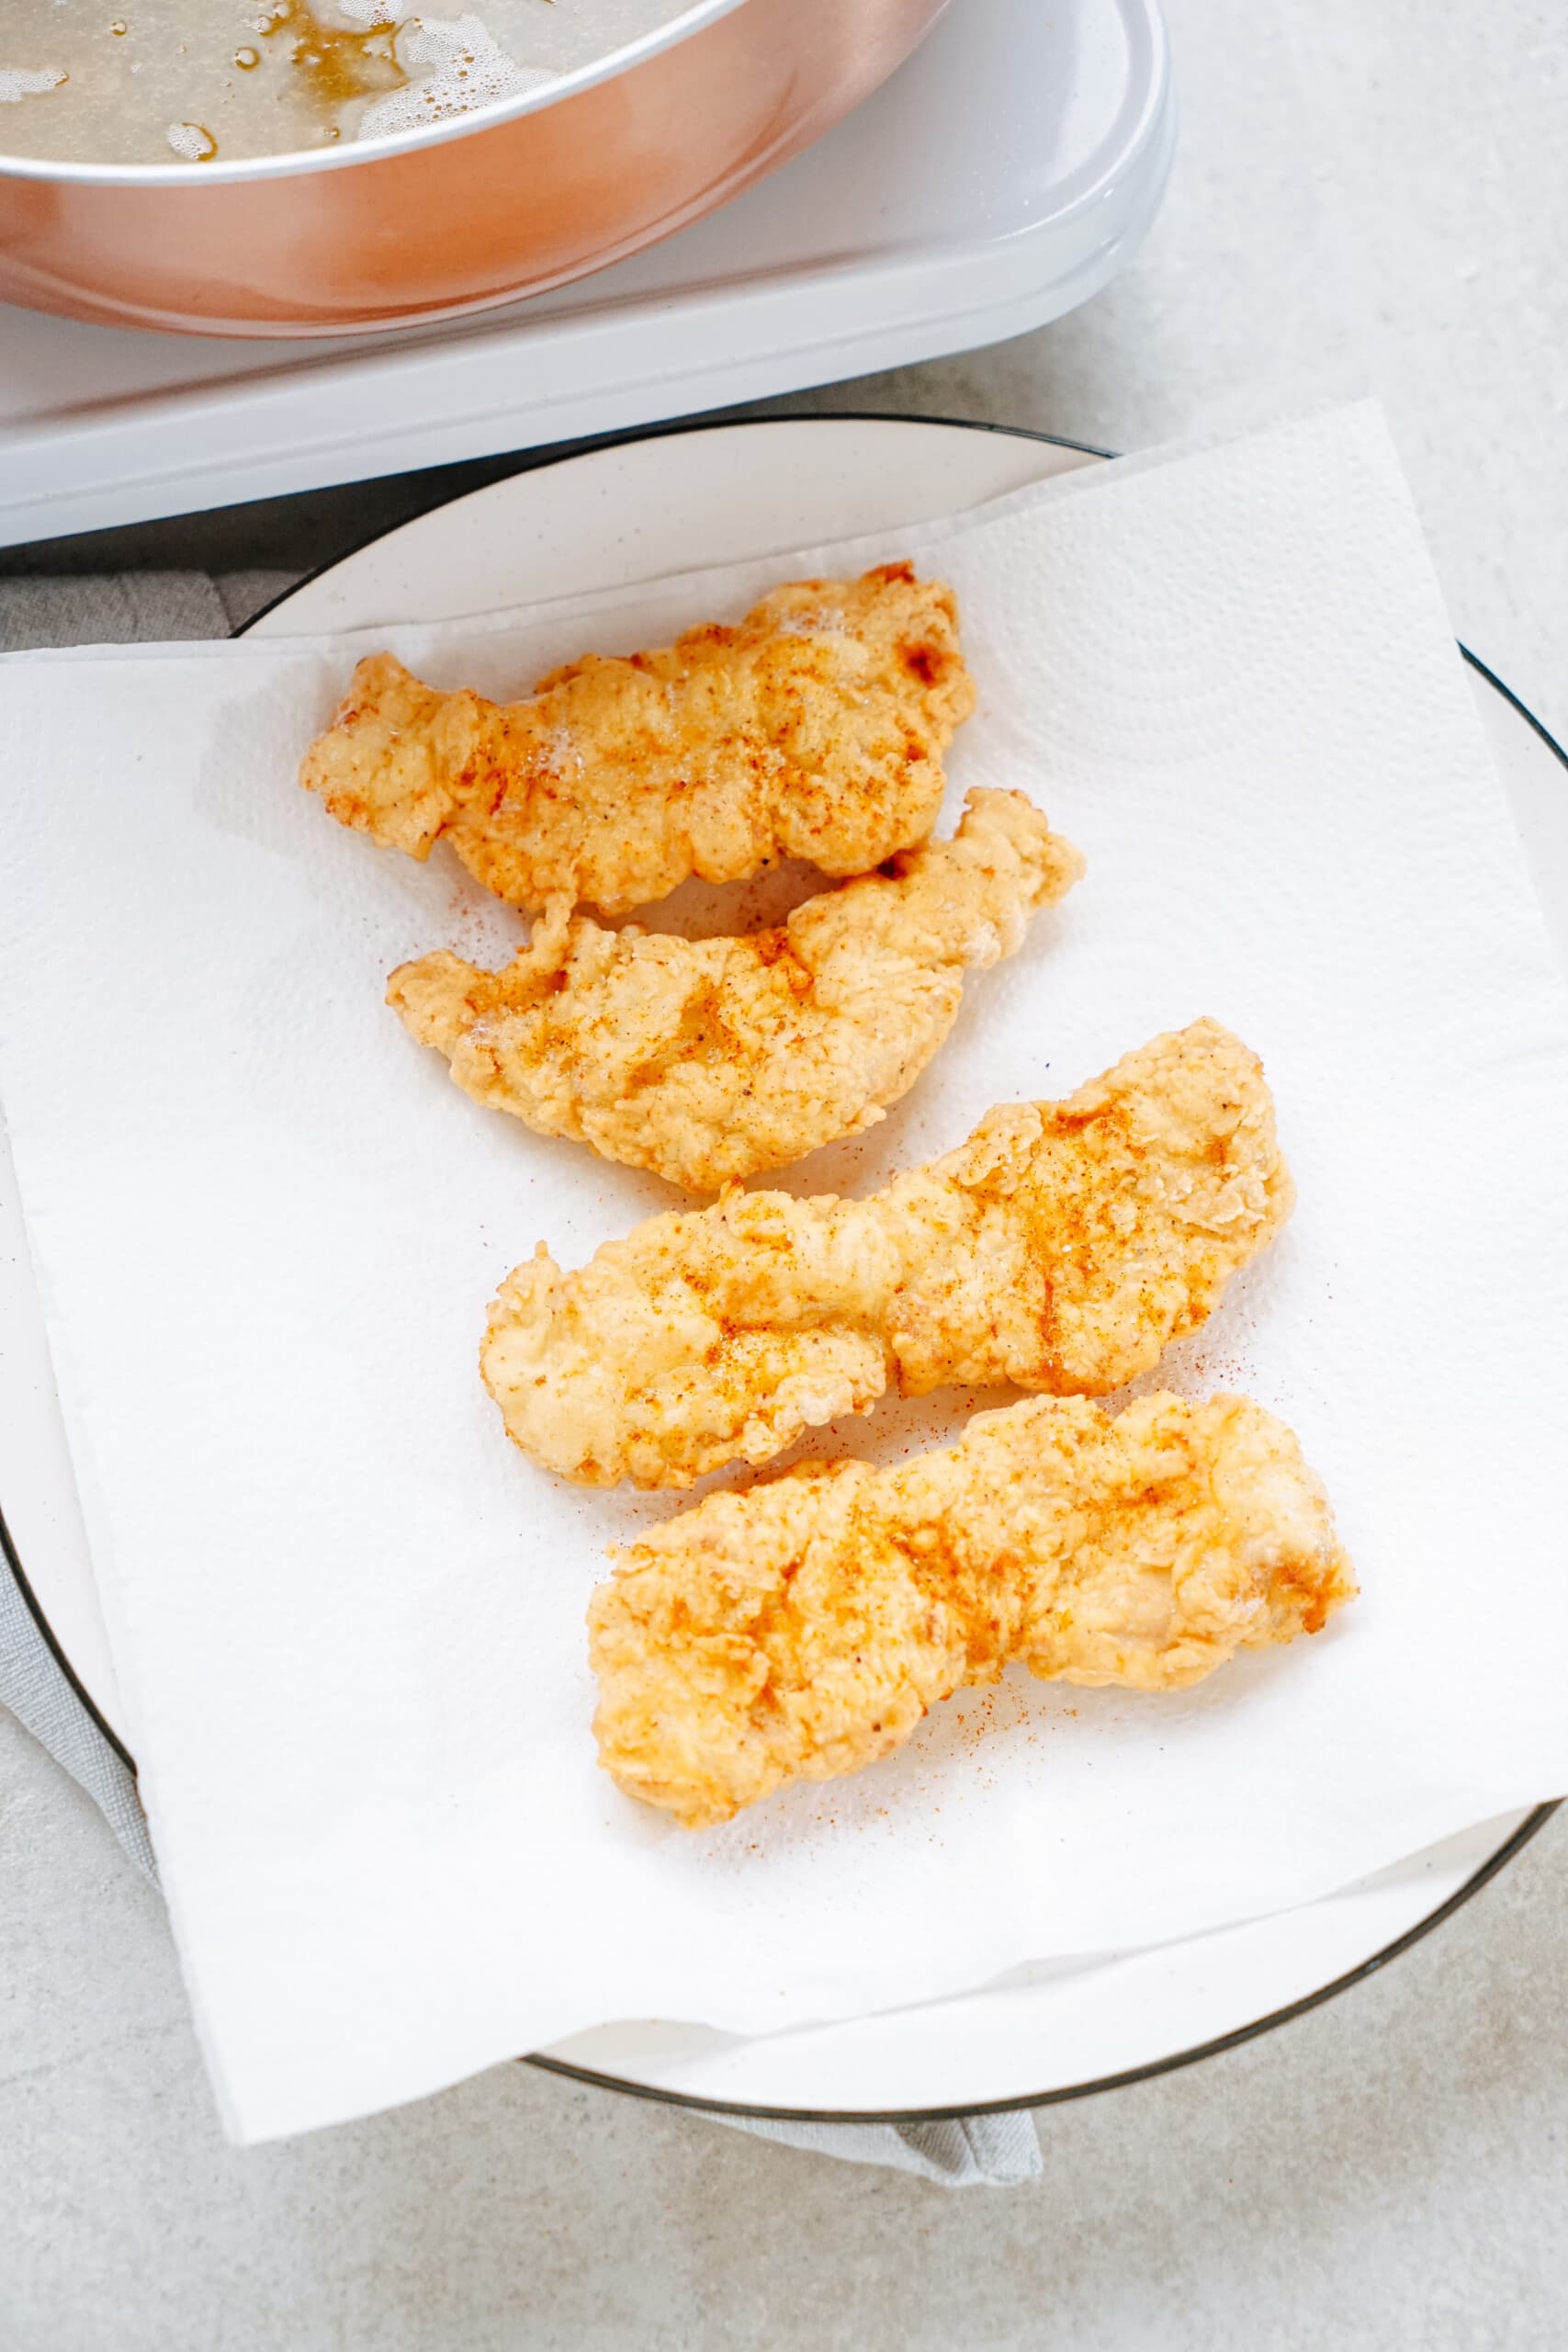 fried chicken on paper towel